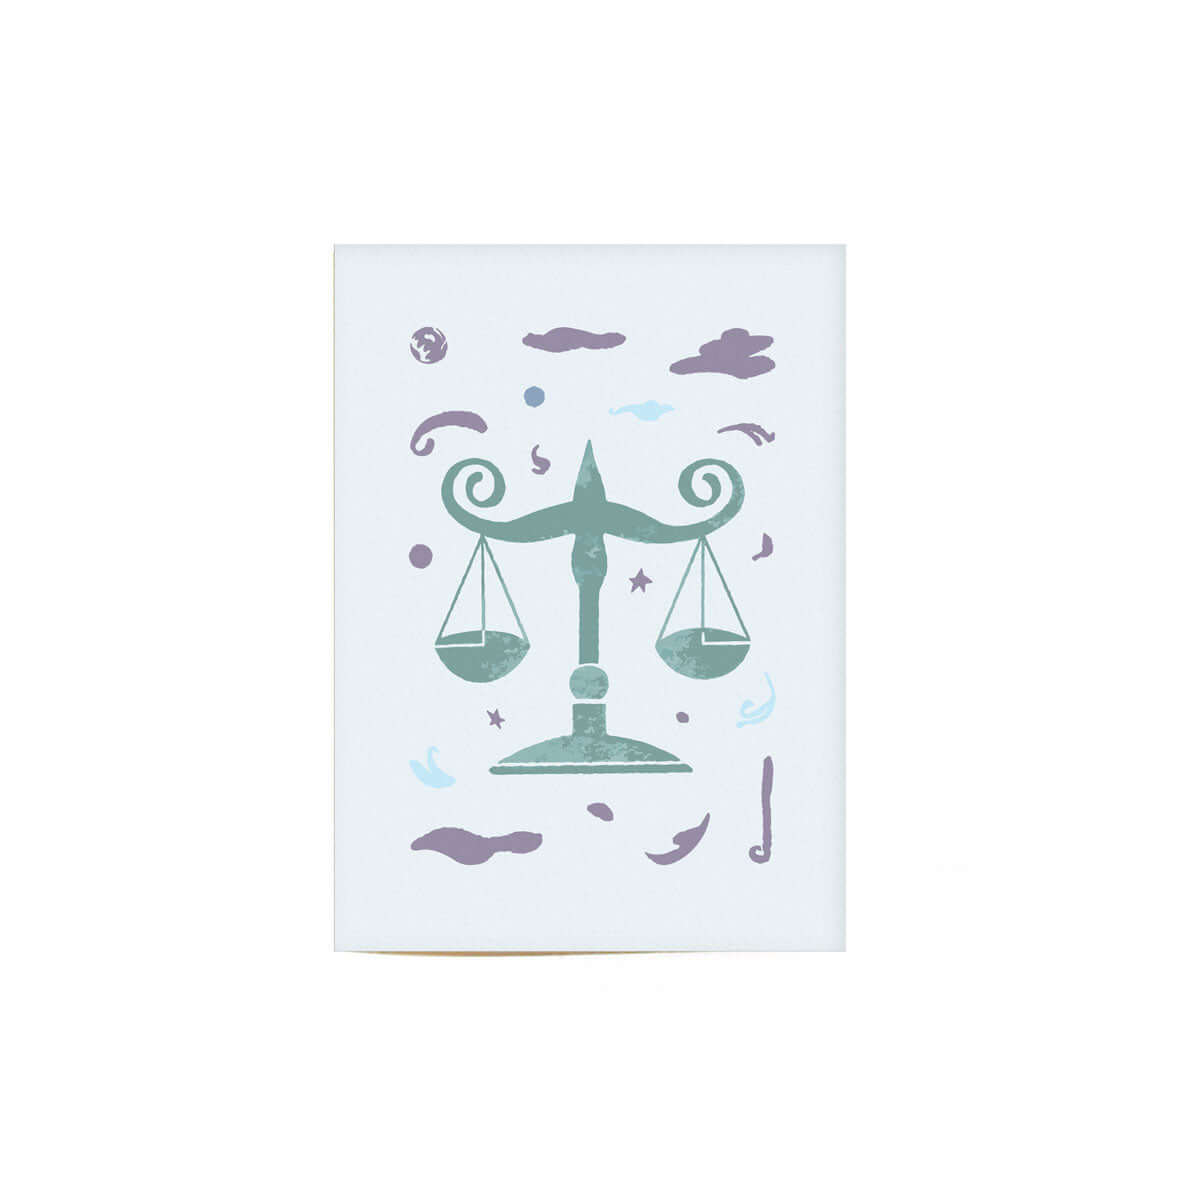 baby blue Libra greeting card with a libra scale illustration on the cover